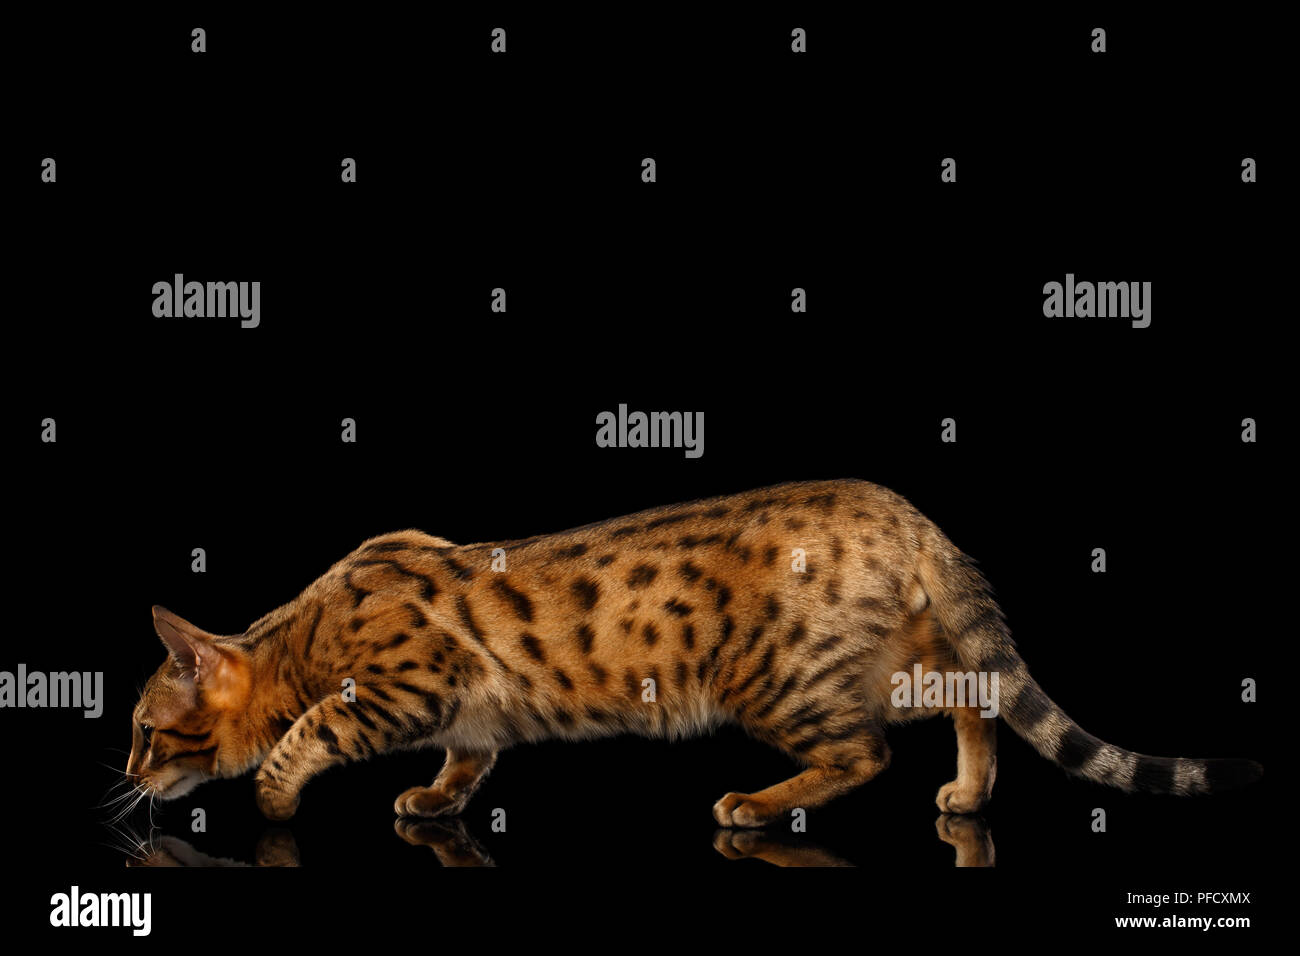 Hunts Gold Bengal female Cat crouching with beautiful Spots, Walking on Isolated Black Background, Side view Stock Photo